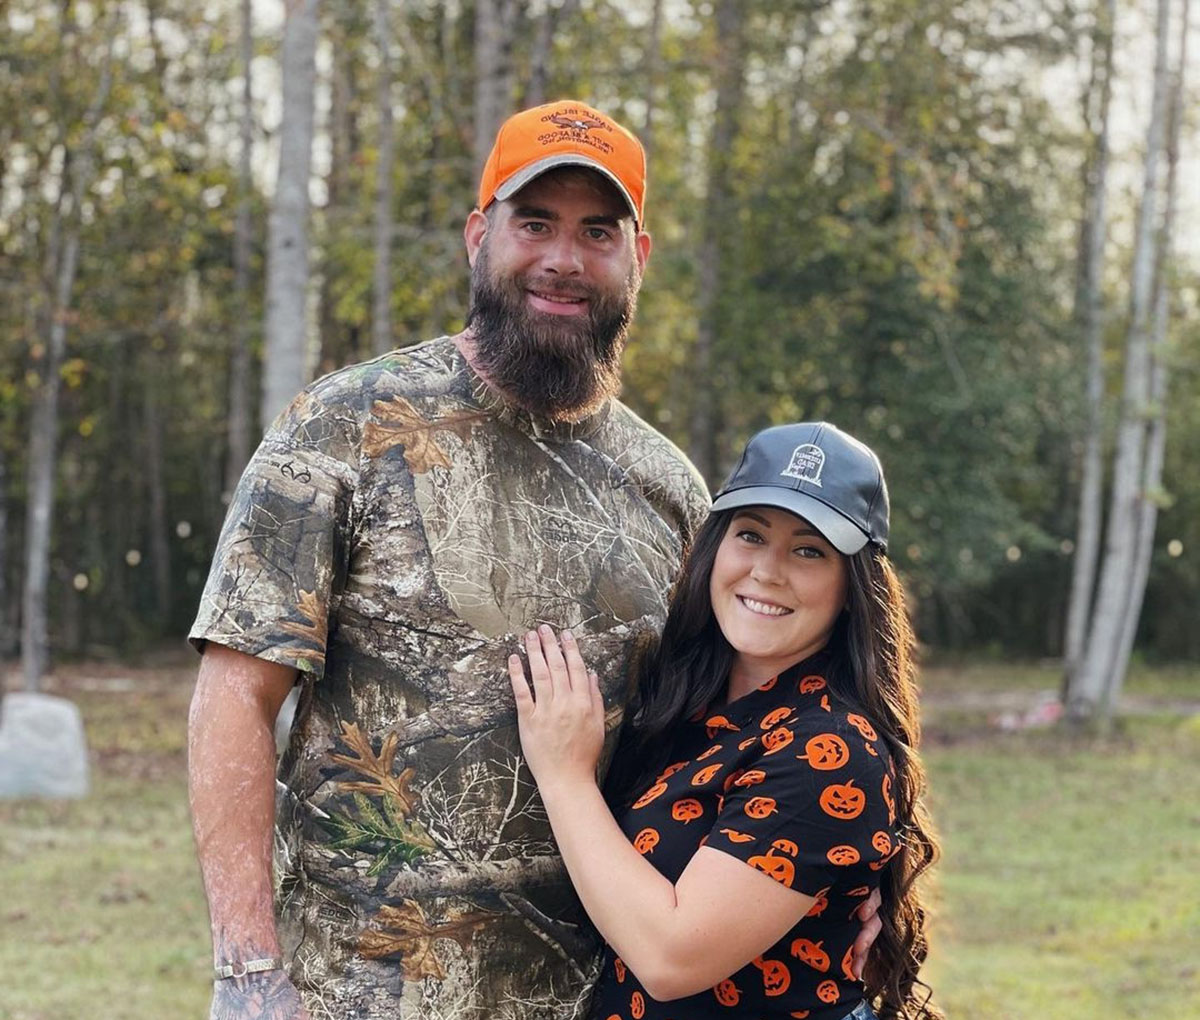 Teen Mom Jenelle Evans’ Home Targeted In Attempted Break-In